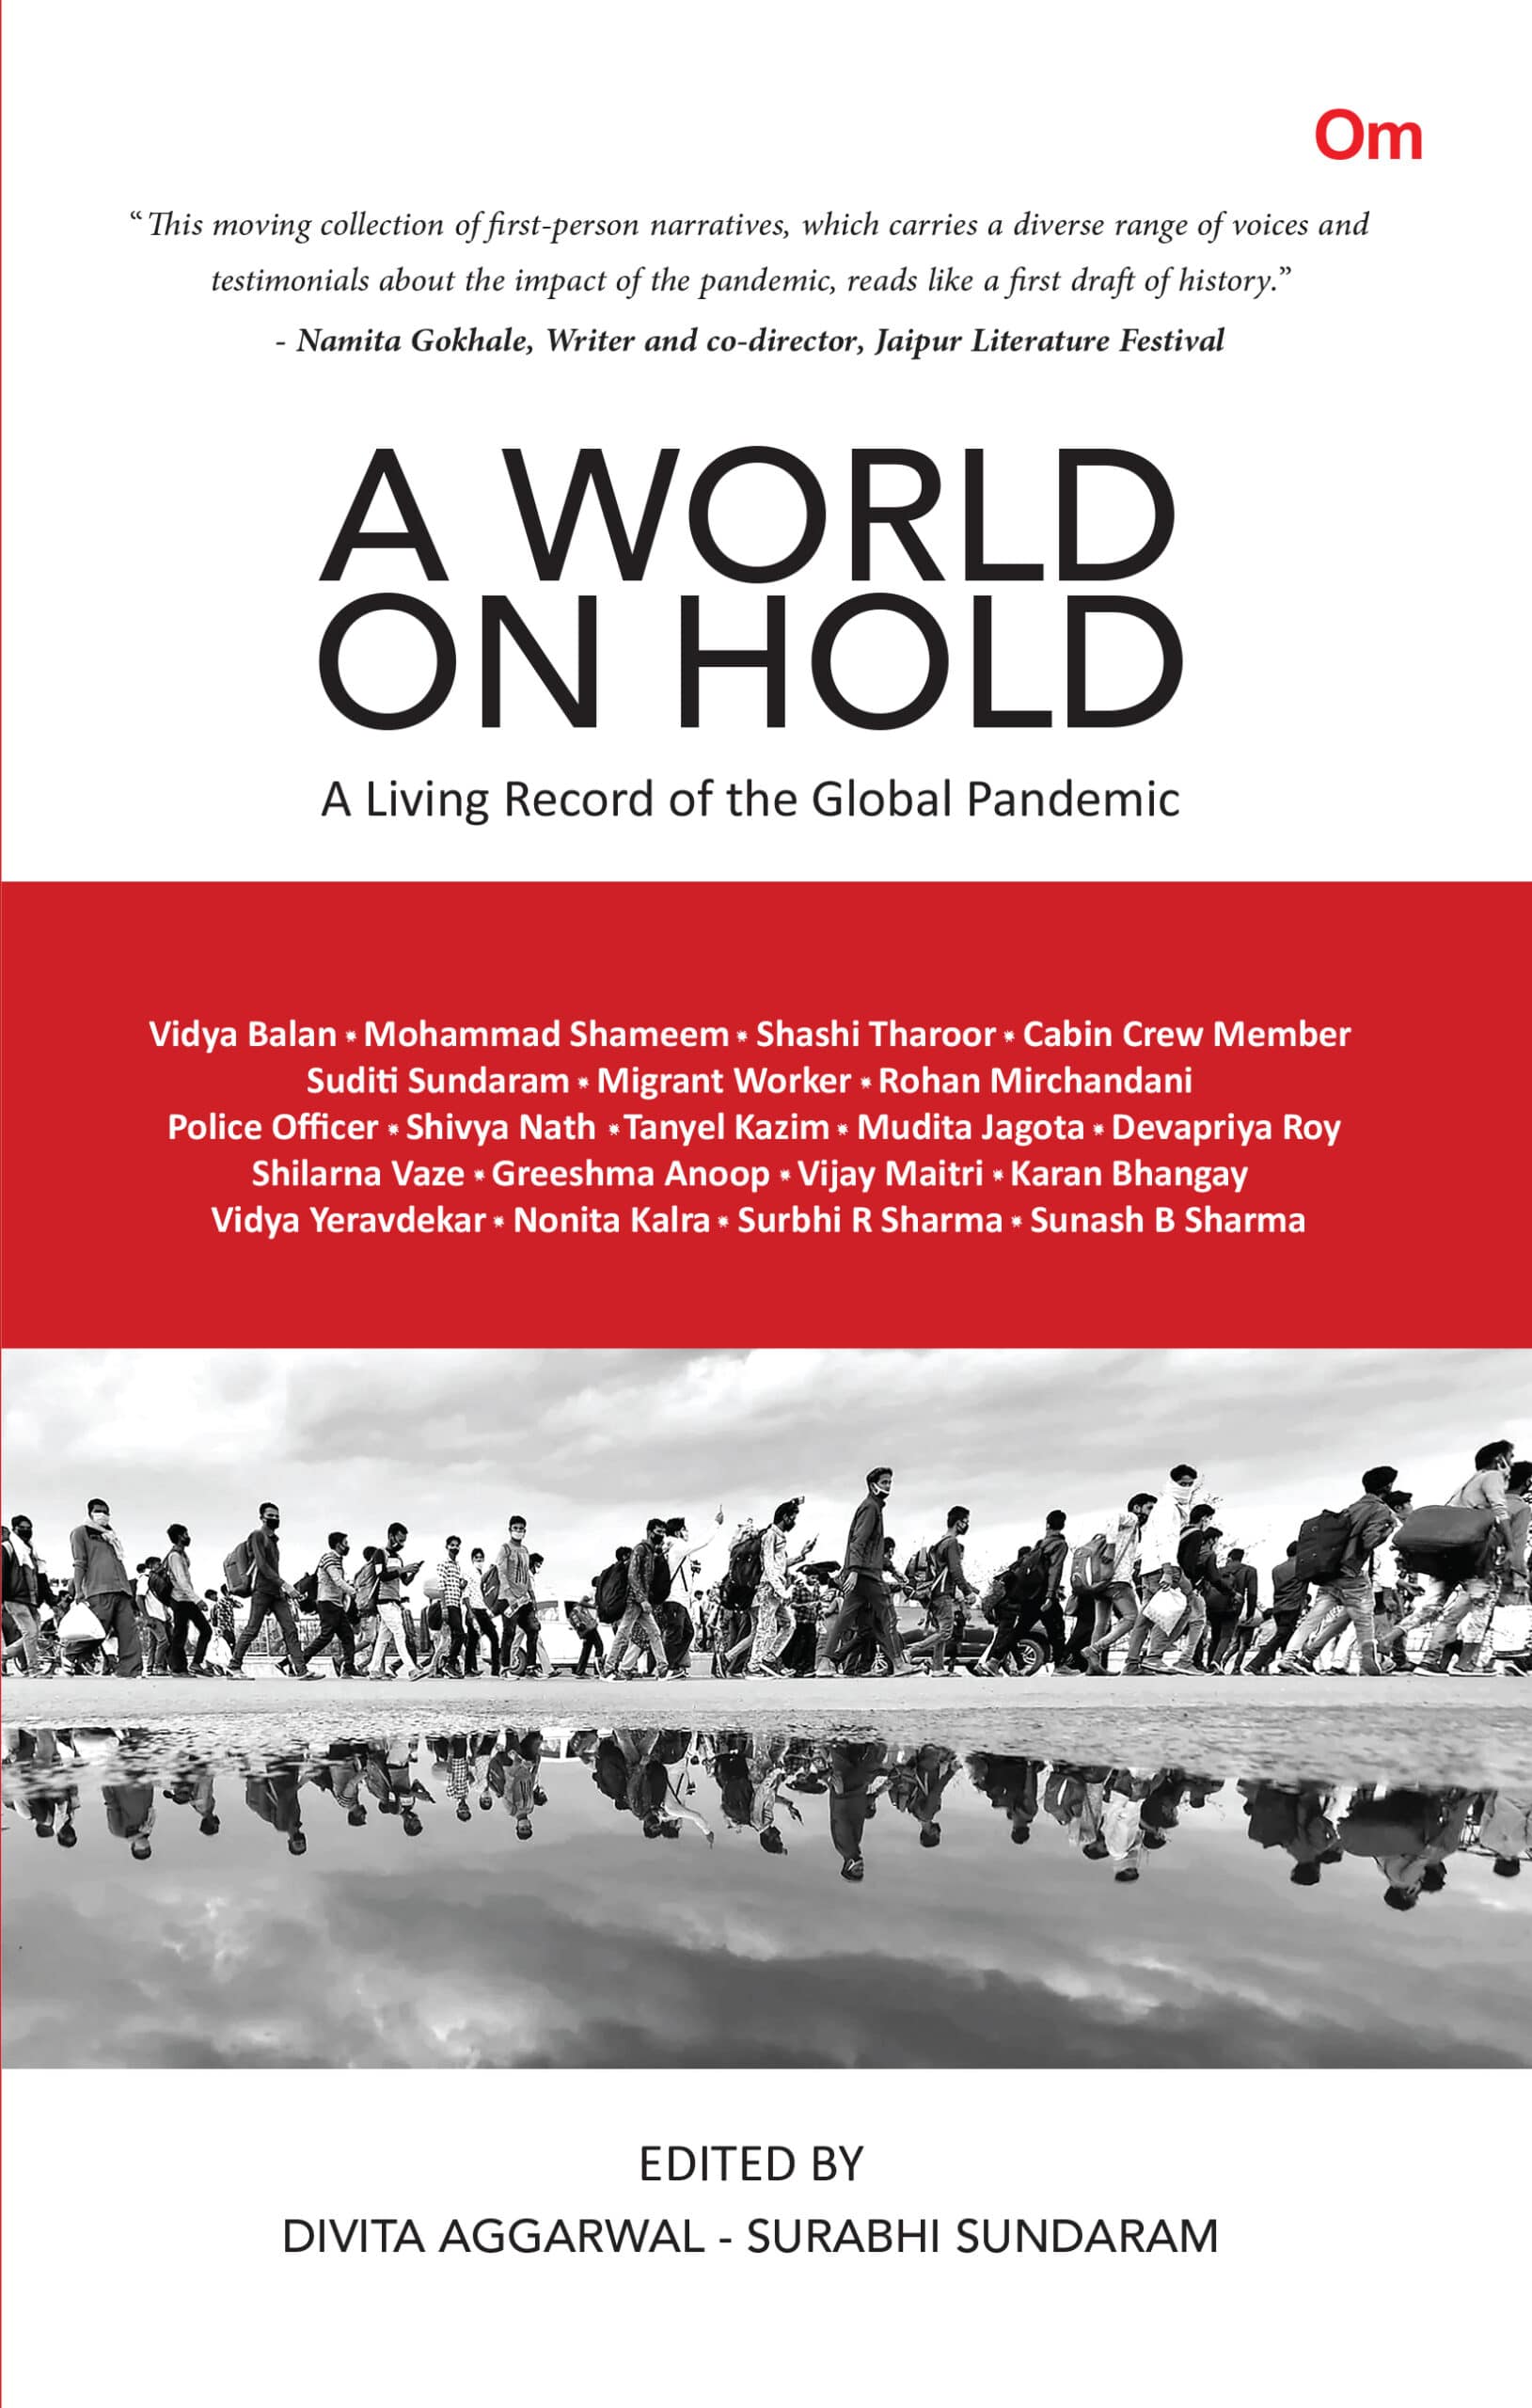 Cover image for A World on Hold